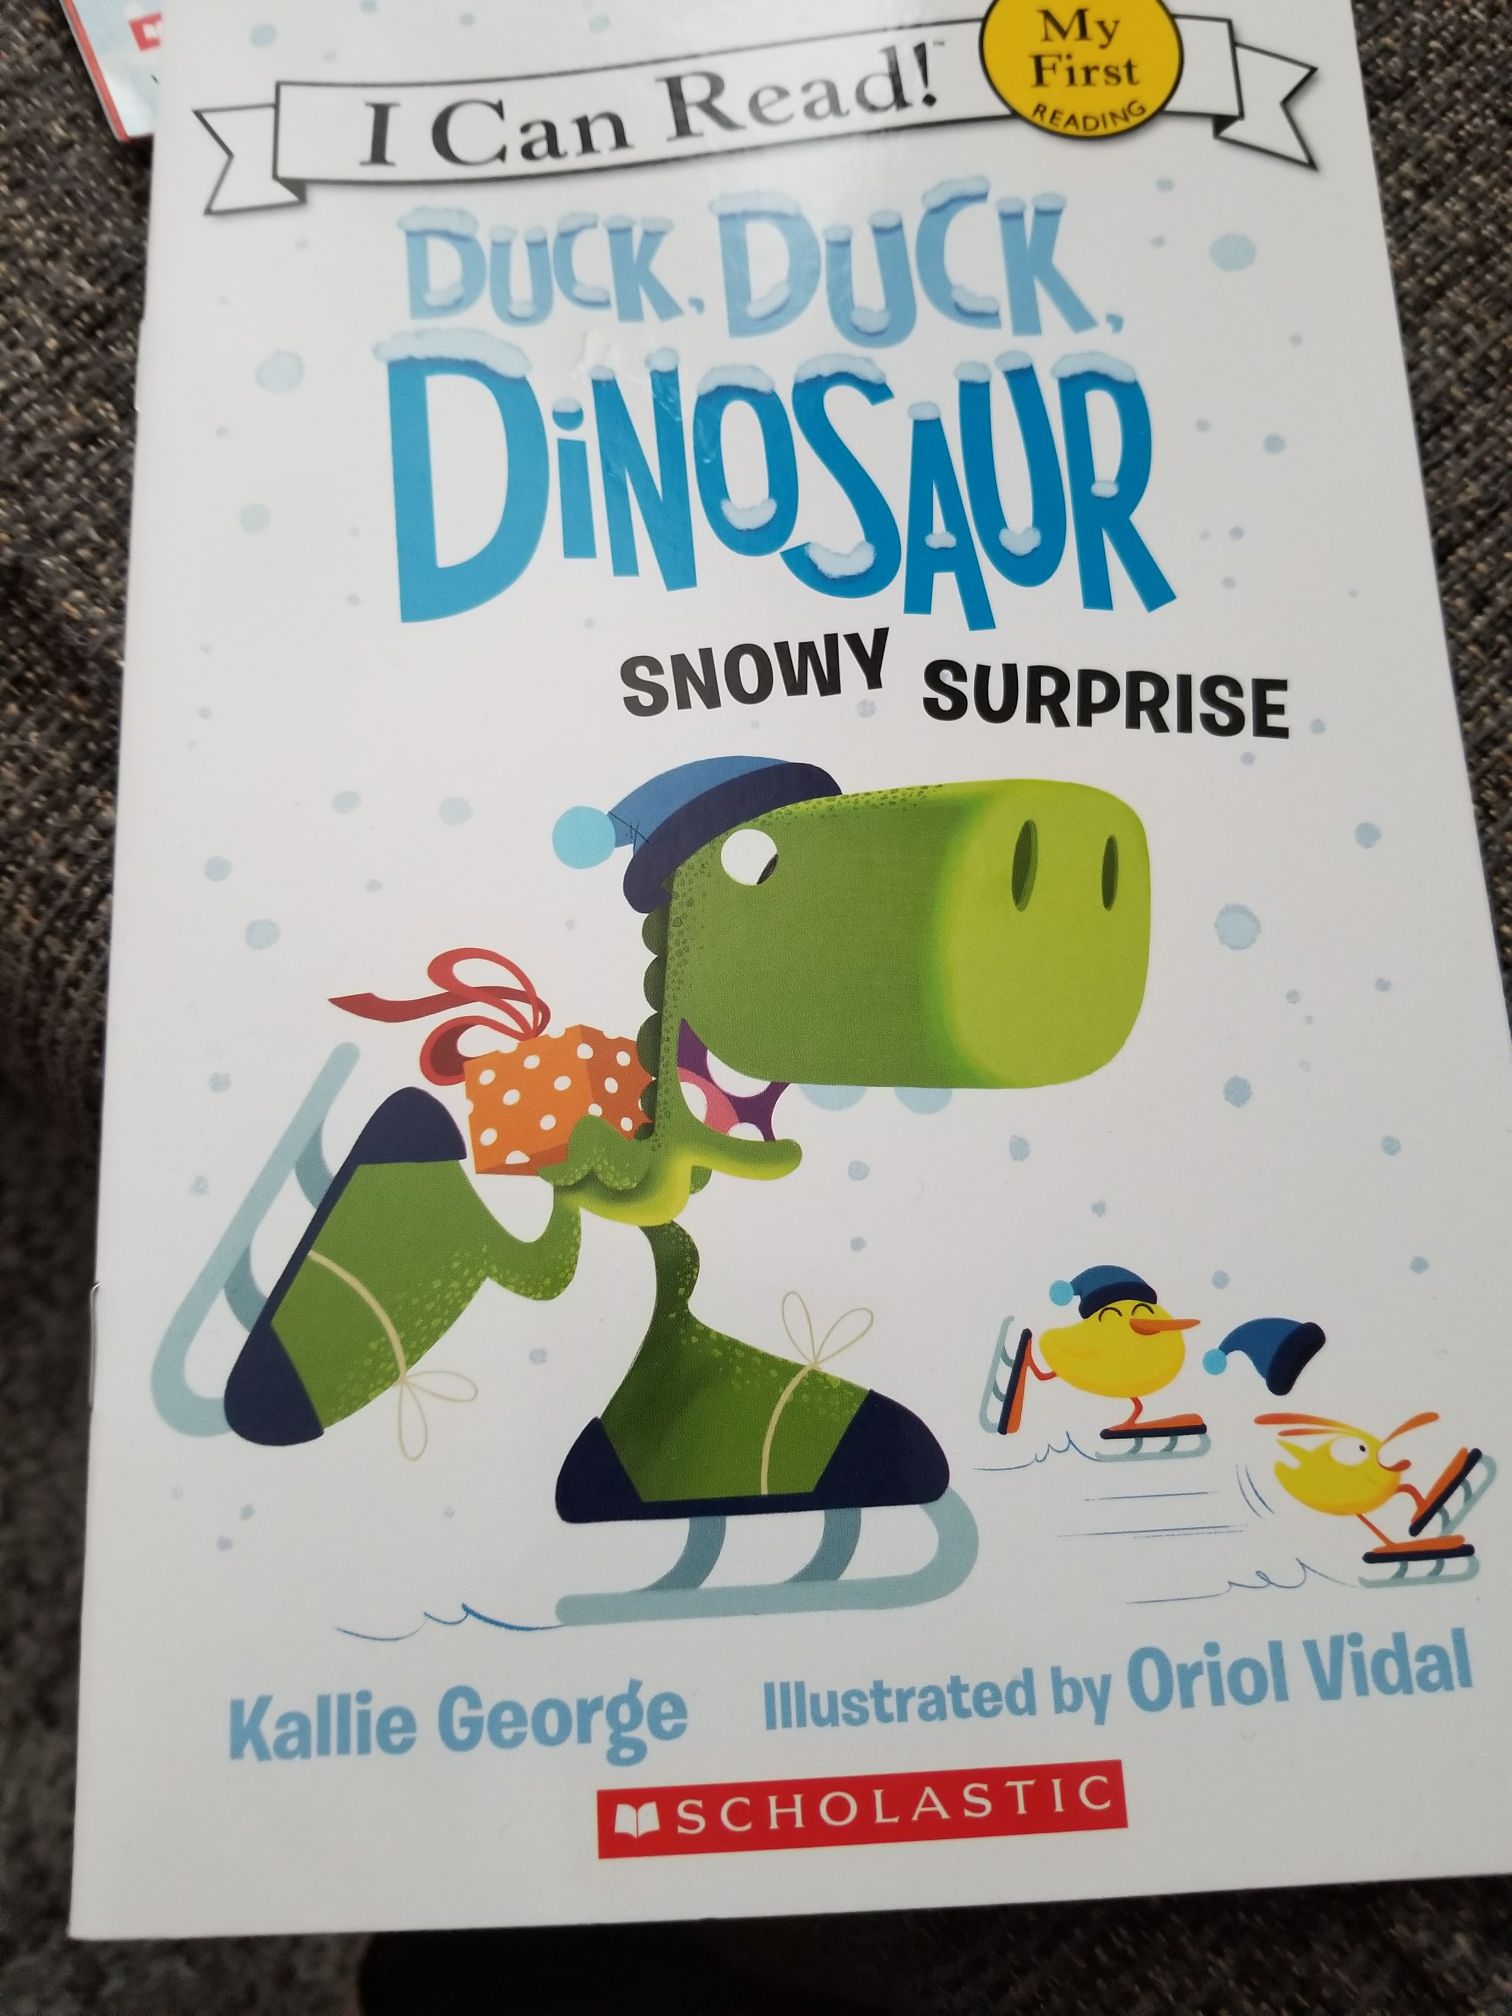 Duck, Duck, Dinosaur Snowy Surprise - Kallie George (Scholastic) book collectible [Barcode 9781338237931] - Main Image 1